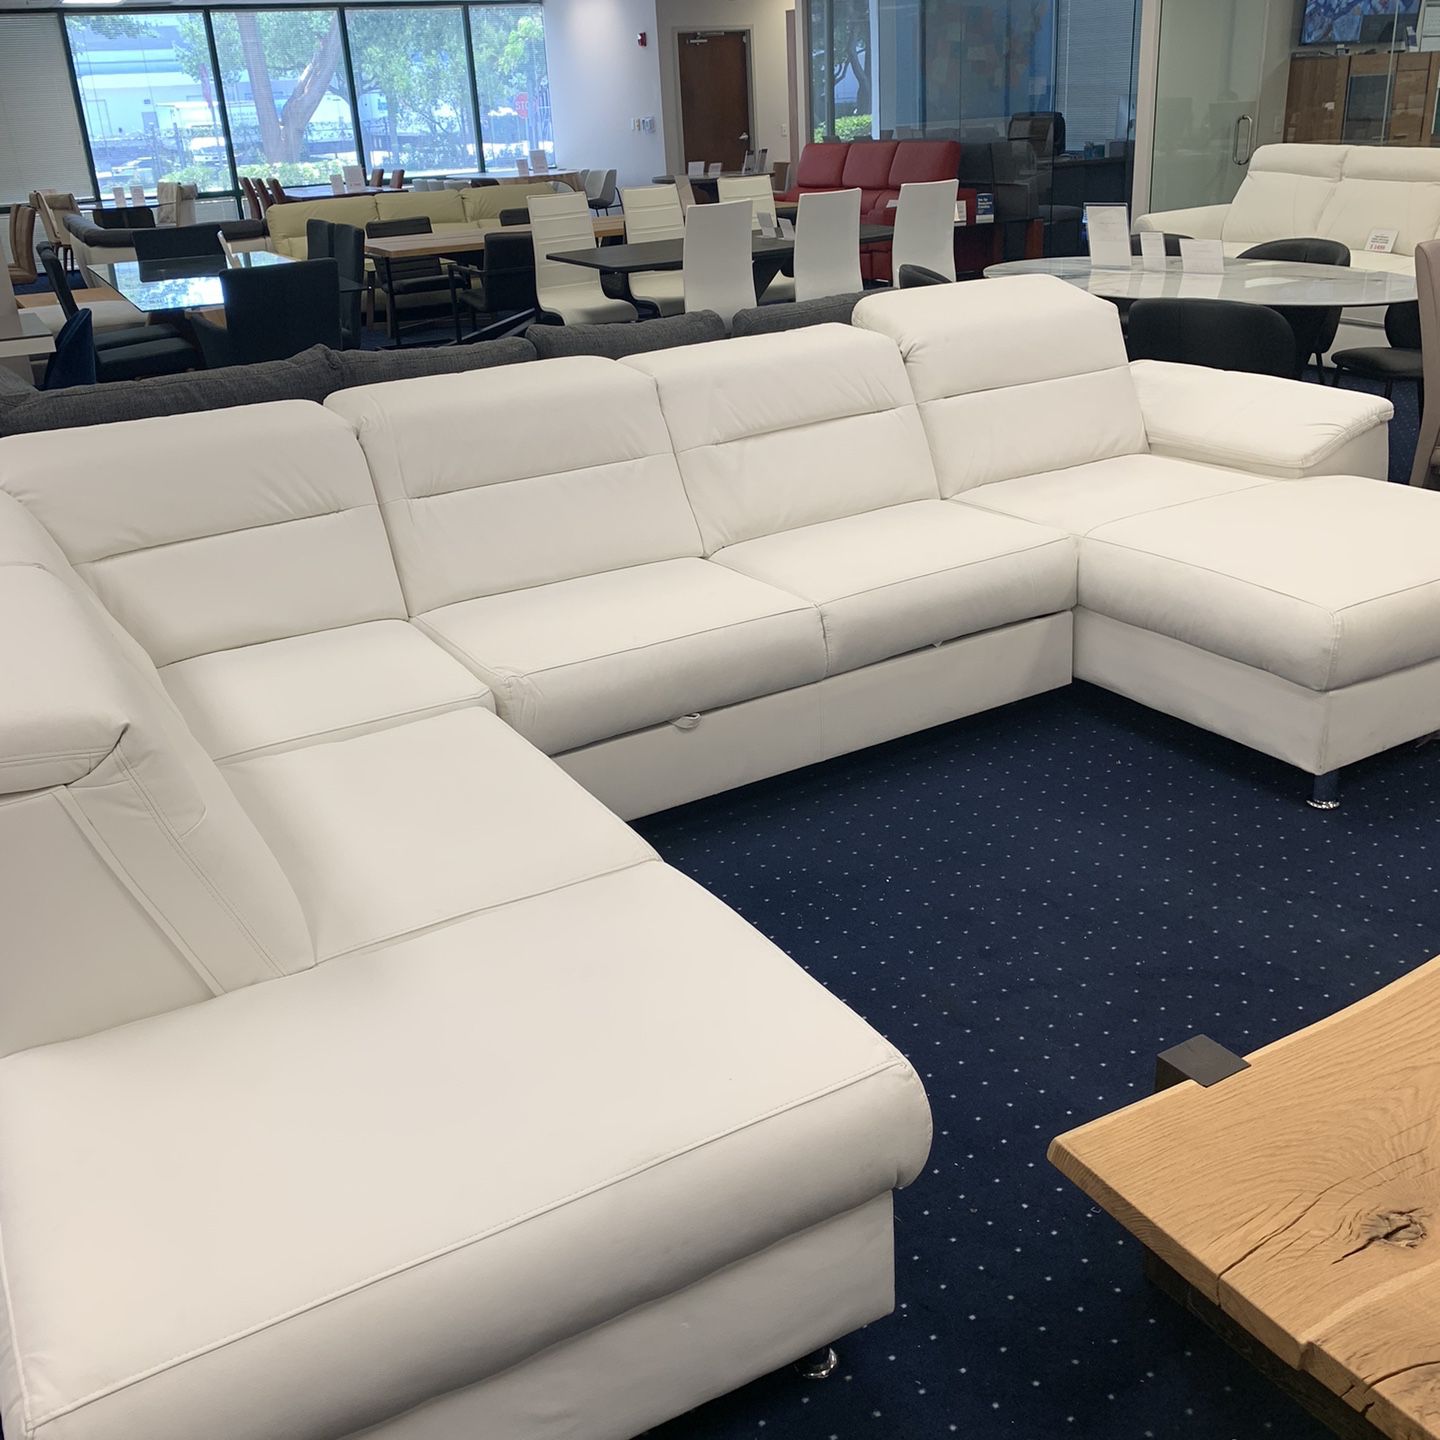 MODERN SECTIONAL SLEEPER WITH STORAGE $1120